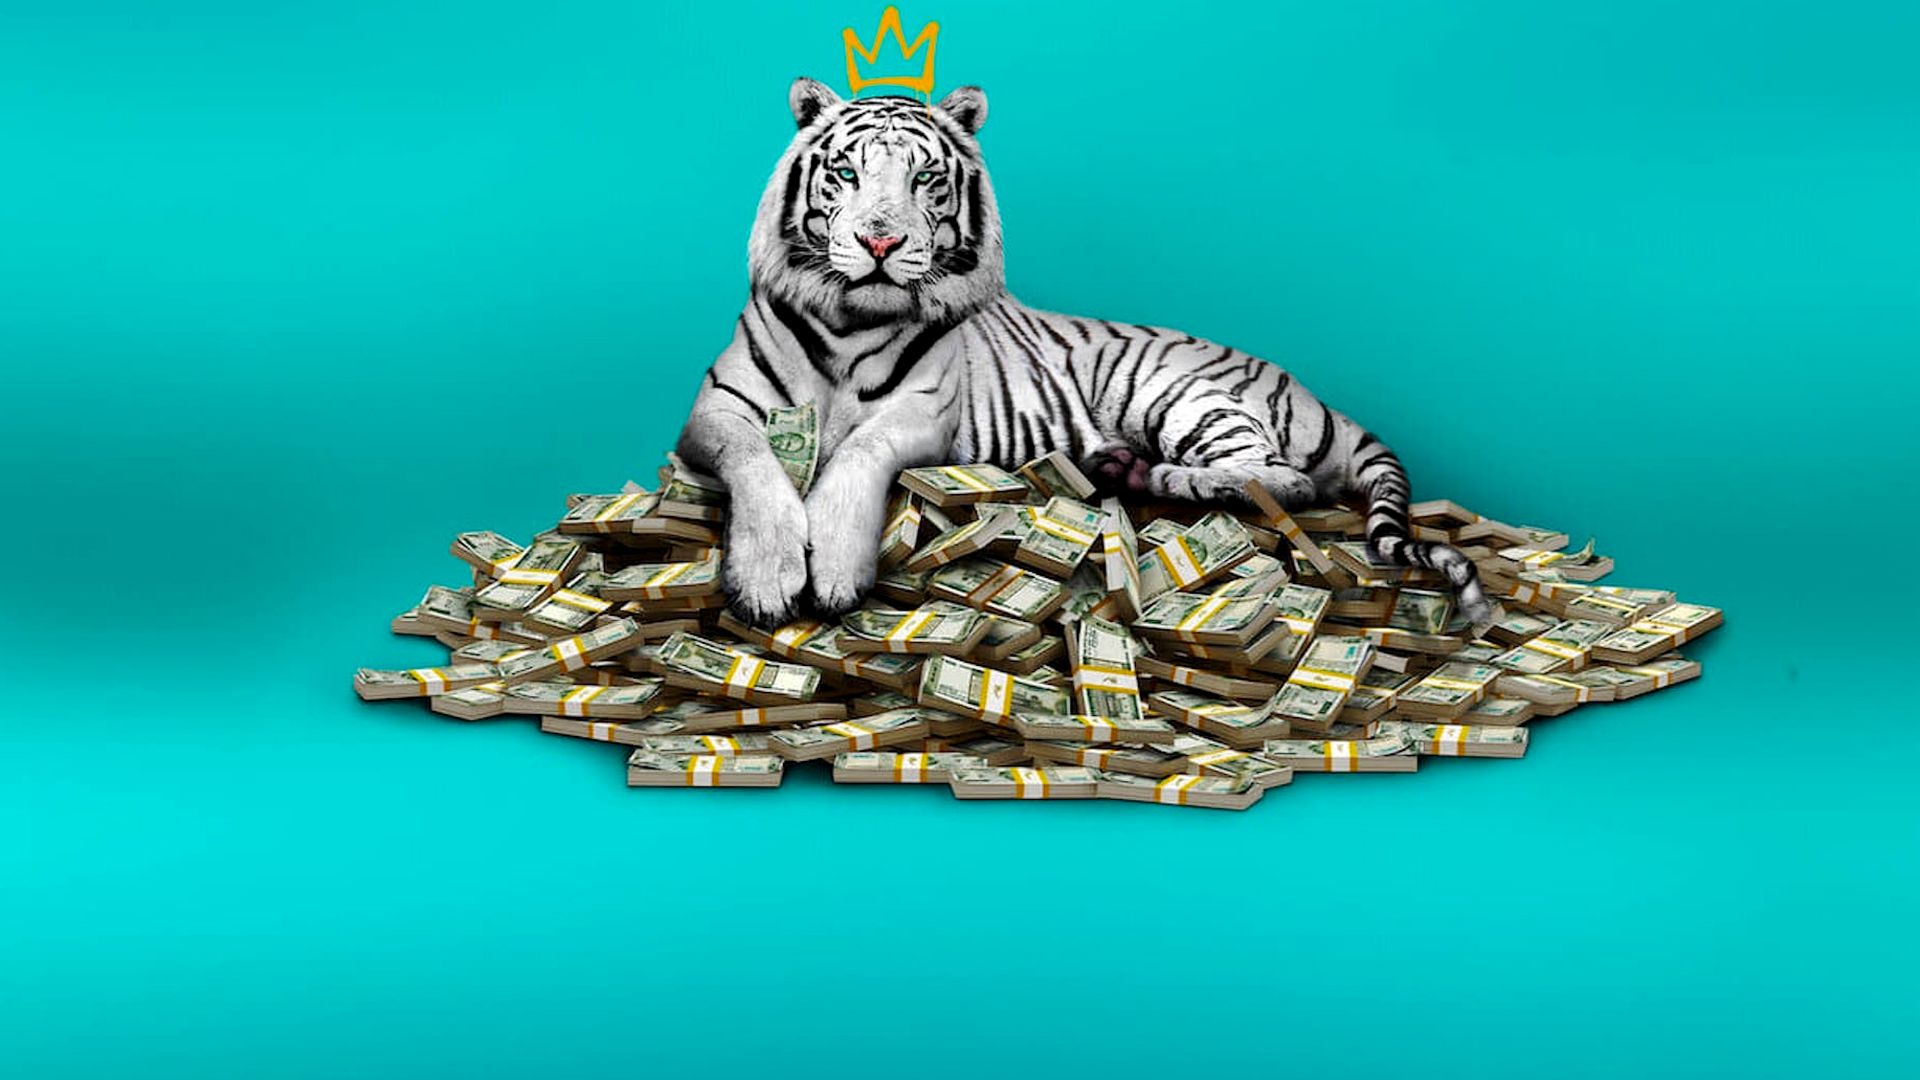 The White Tiger background